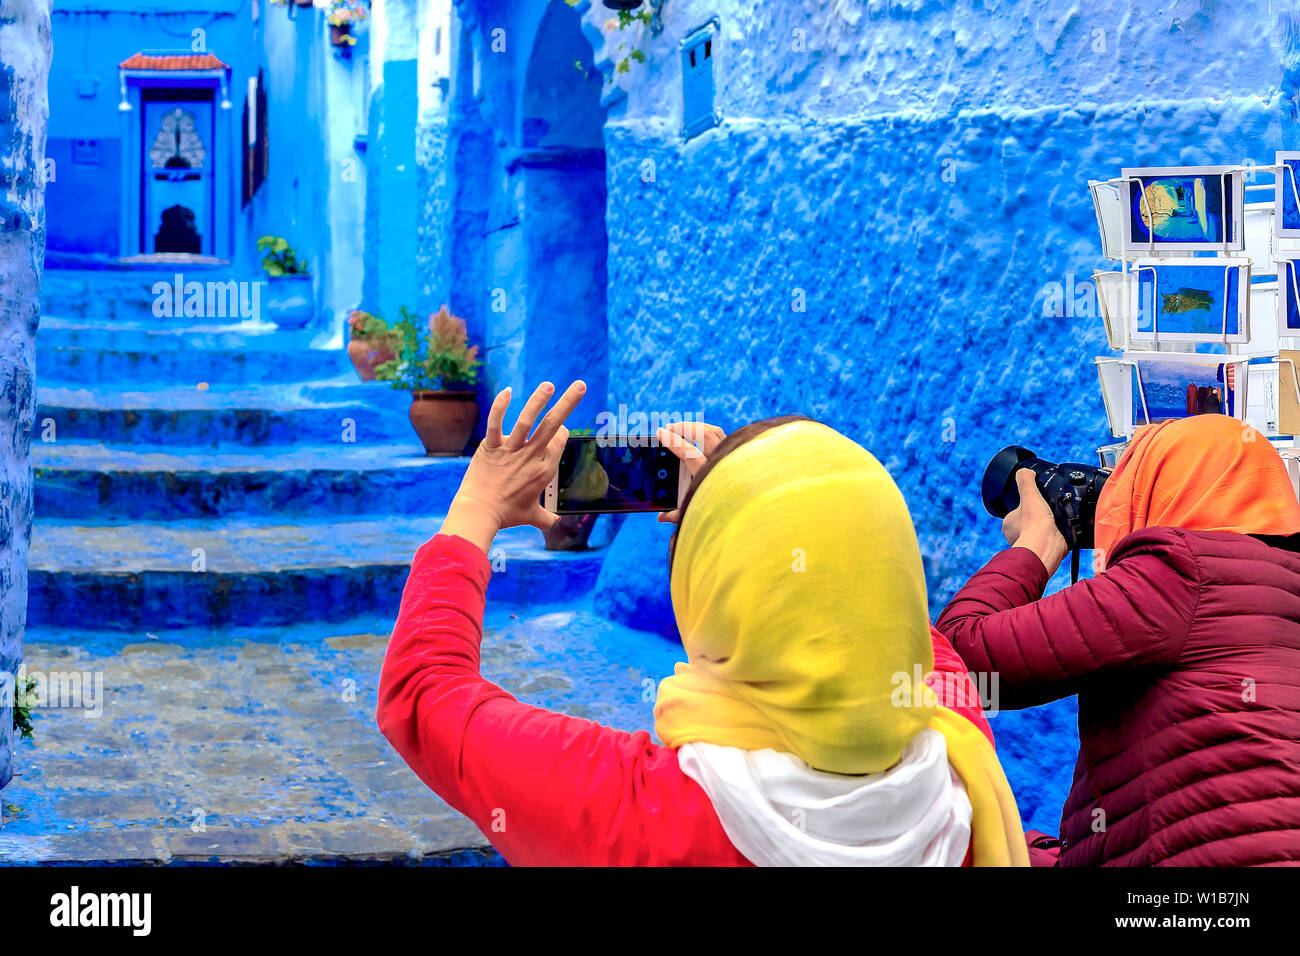 Chefchaouen, Morocco - 24/04/2019: Tourists taking pictures in Chefchaouen, a beautiful city in northern Morocco visited by tourists from around the w Stock Photo